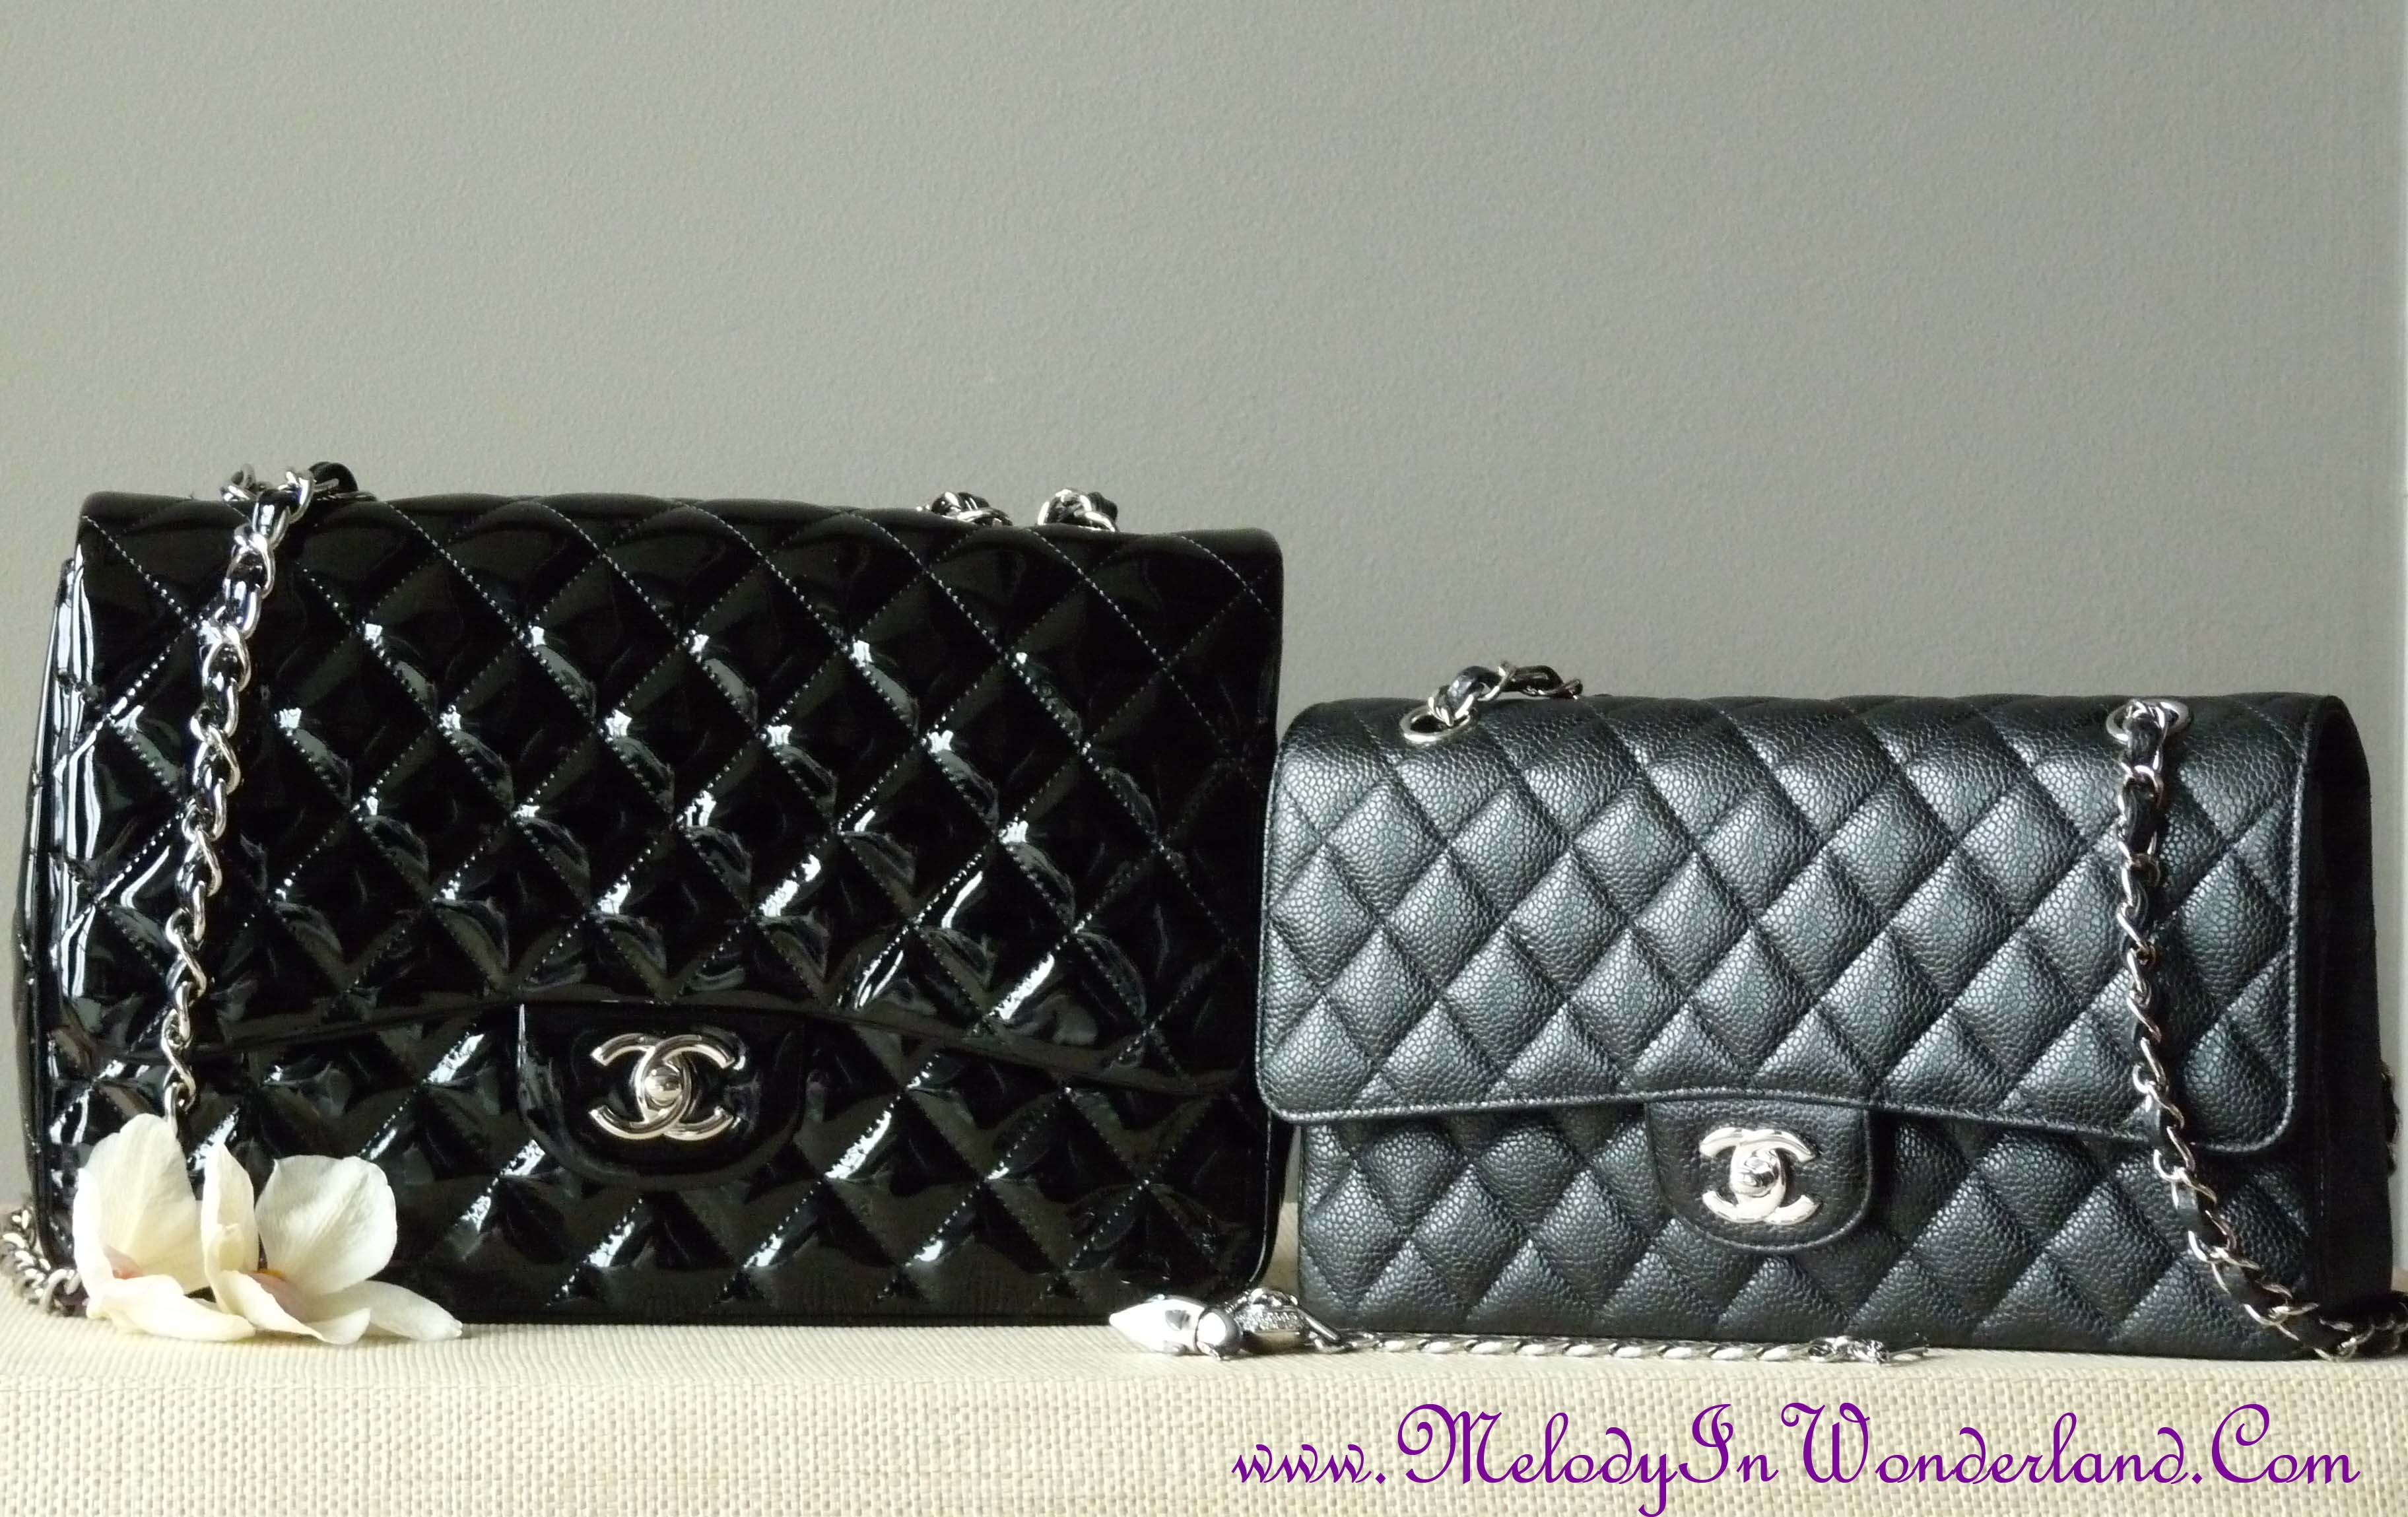 where to find chanel handbags